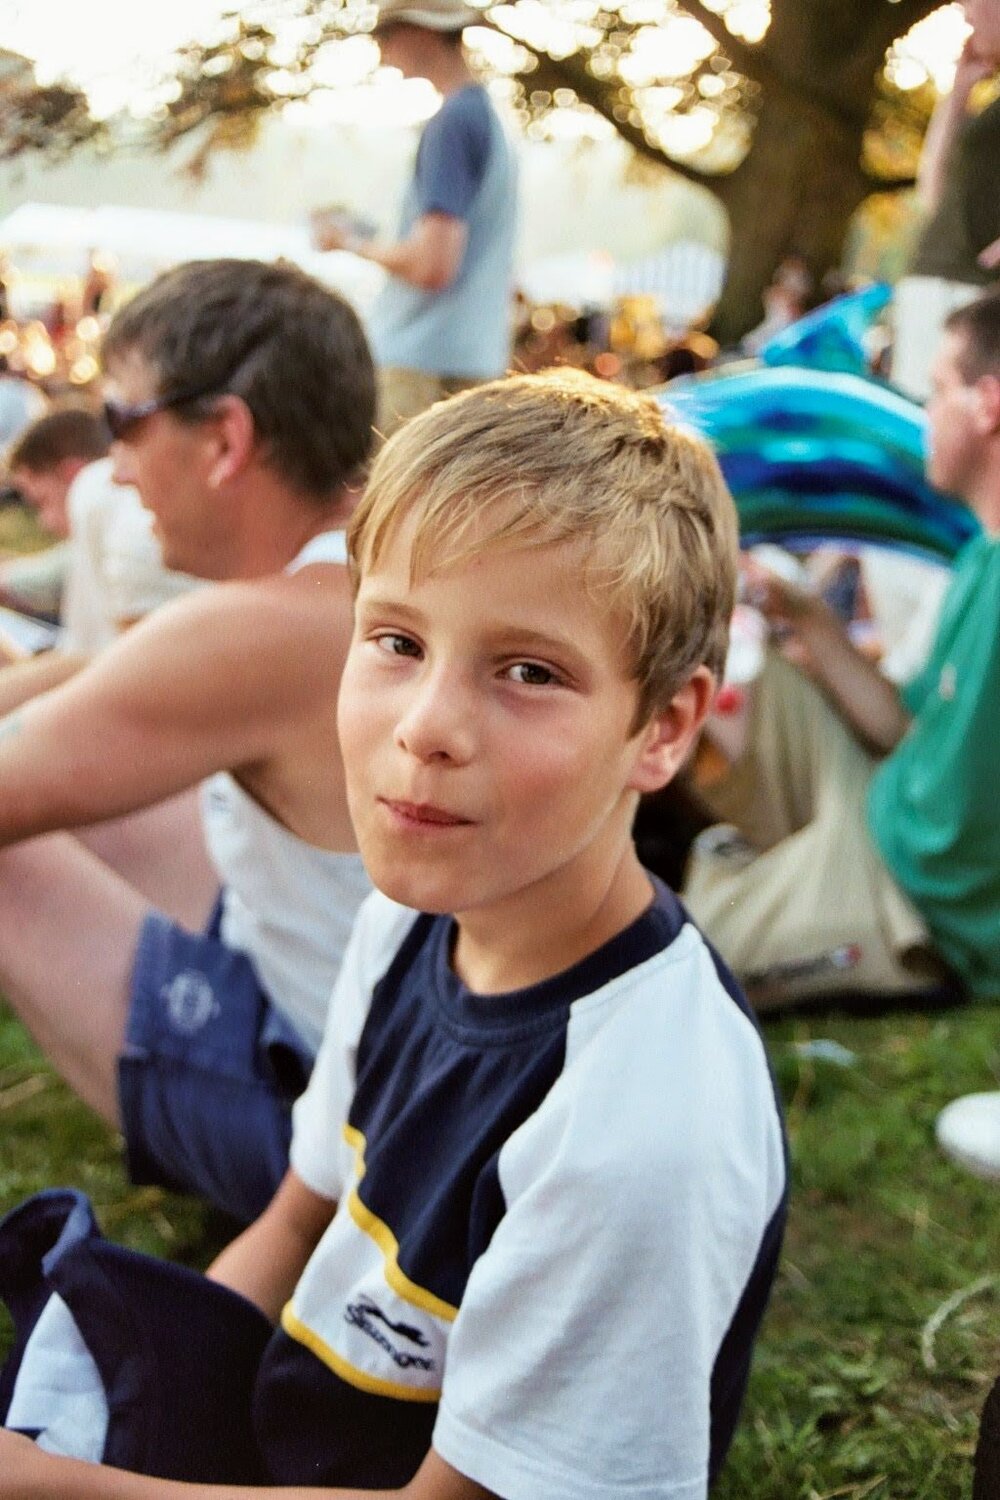 Dec at a family carnival as a young boy. Photo: Declan Bowring Lacuna Voices